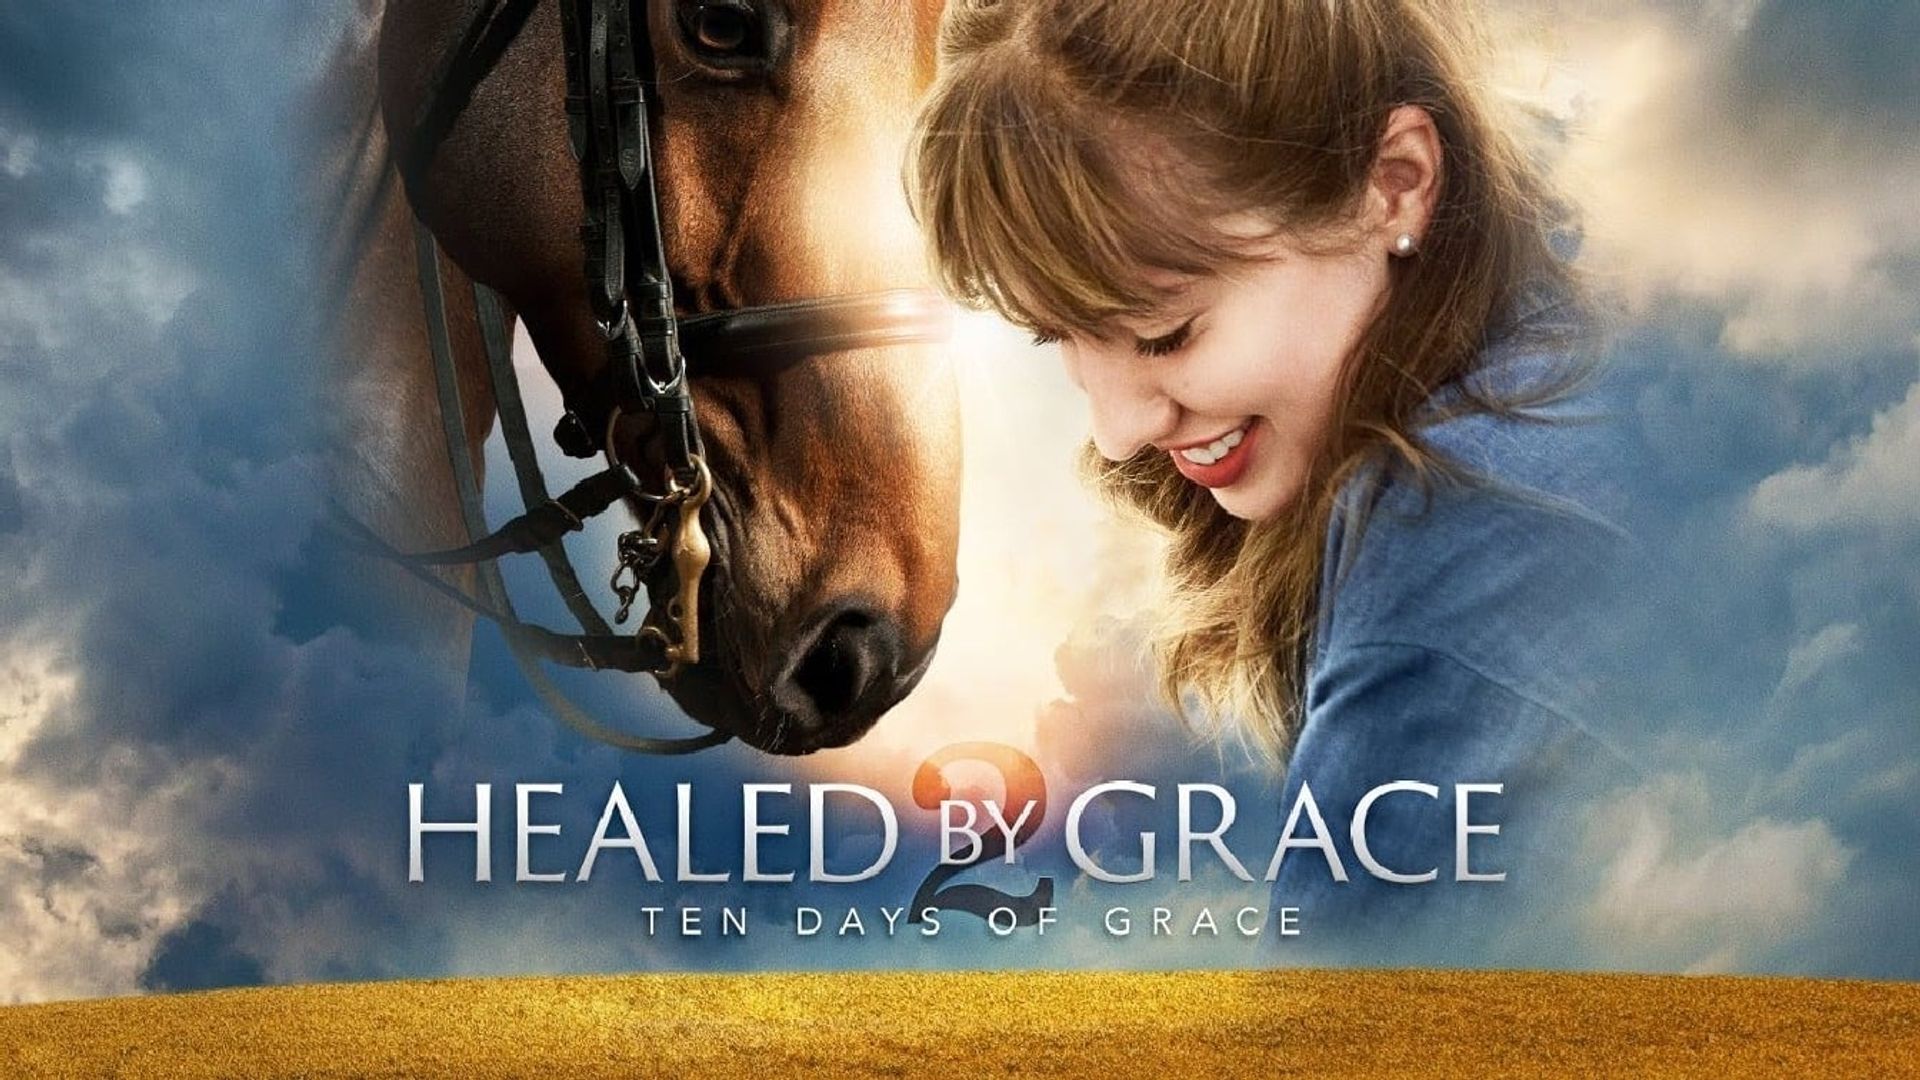 Healed by Grace 2 background